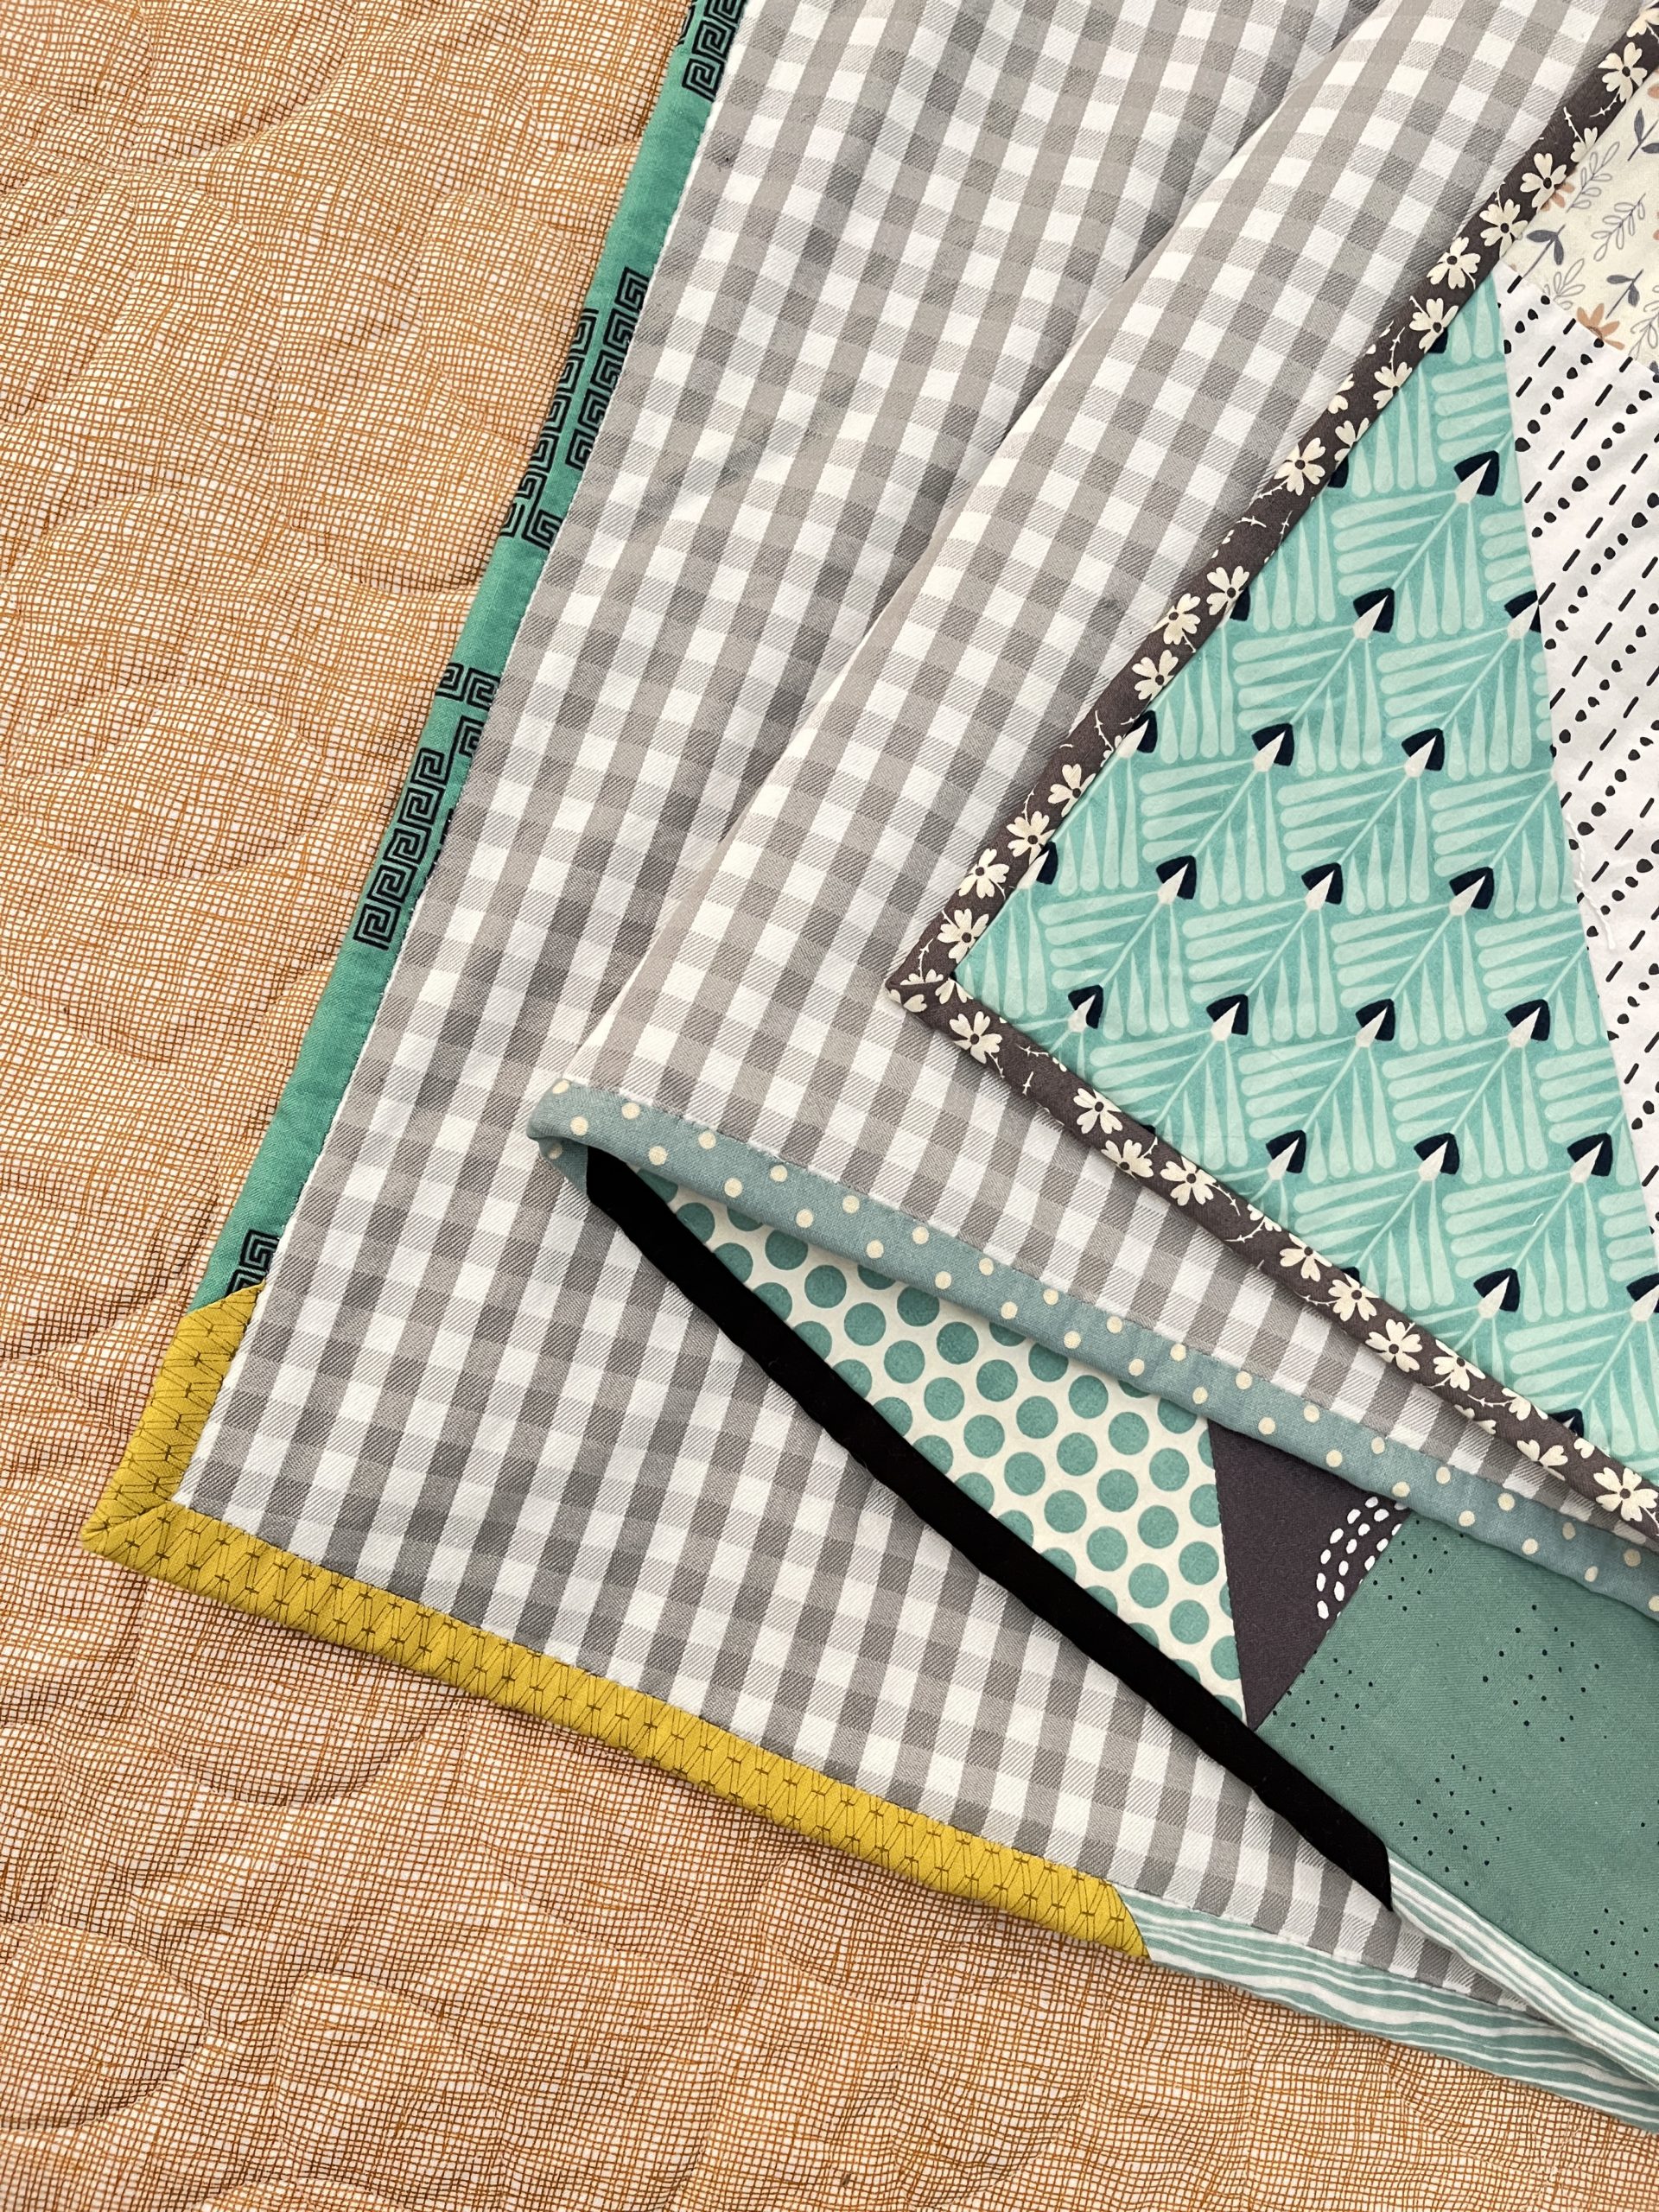 Make a scrappy quilt binding